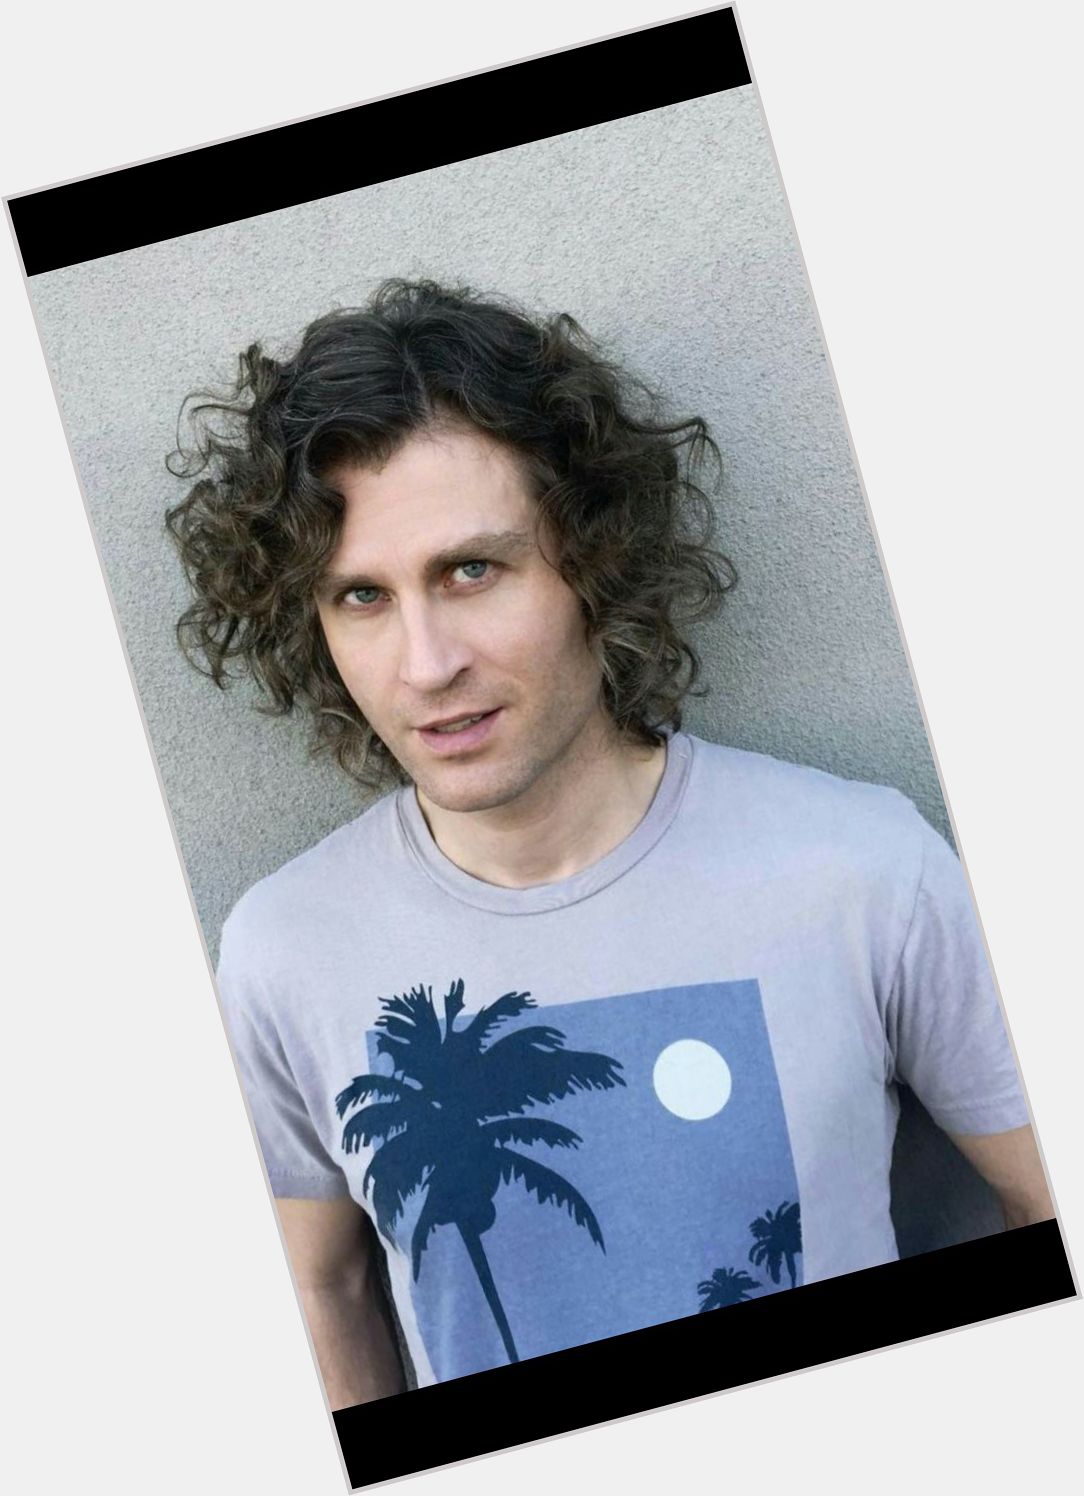 <a href="/hot-men/dave-keuning/is-he-married-tall-much-worth">Dave Keuning</a>  